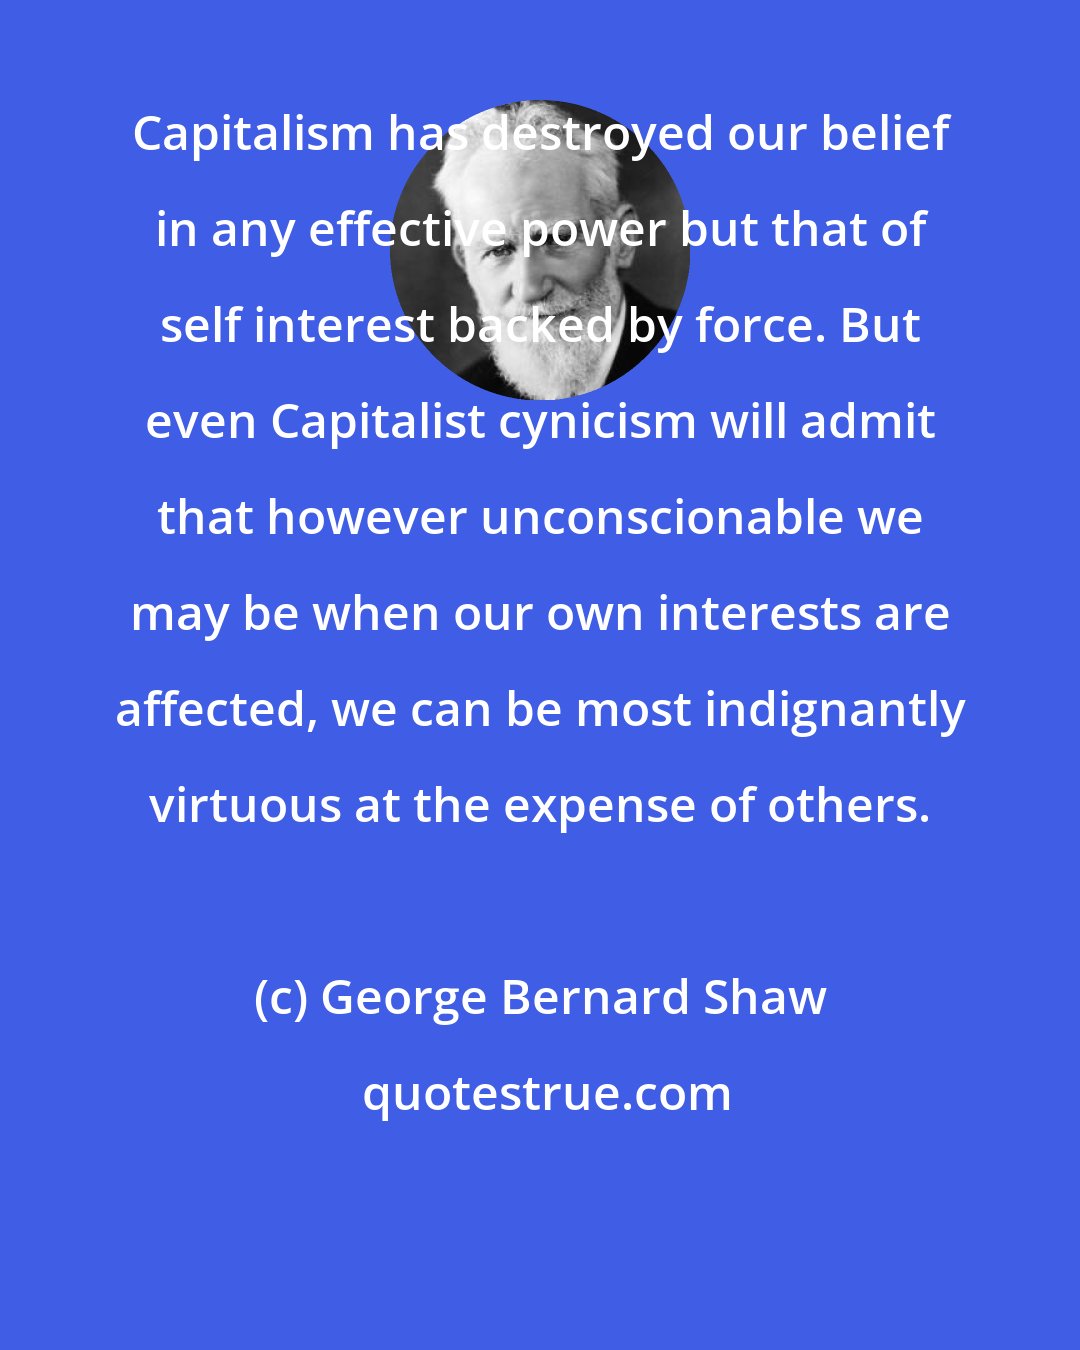 George Bernard Shaw: Capitalism has destroyed our belief in any effective power but that of self interest backed by force. But even Capitalist cynicism will admit that however unconscionable we may be when our own interests are affected, we can be most indignantly virtuous at the expense of others.